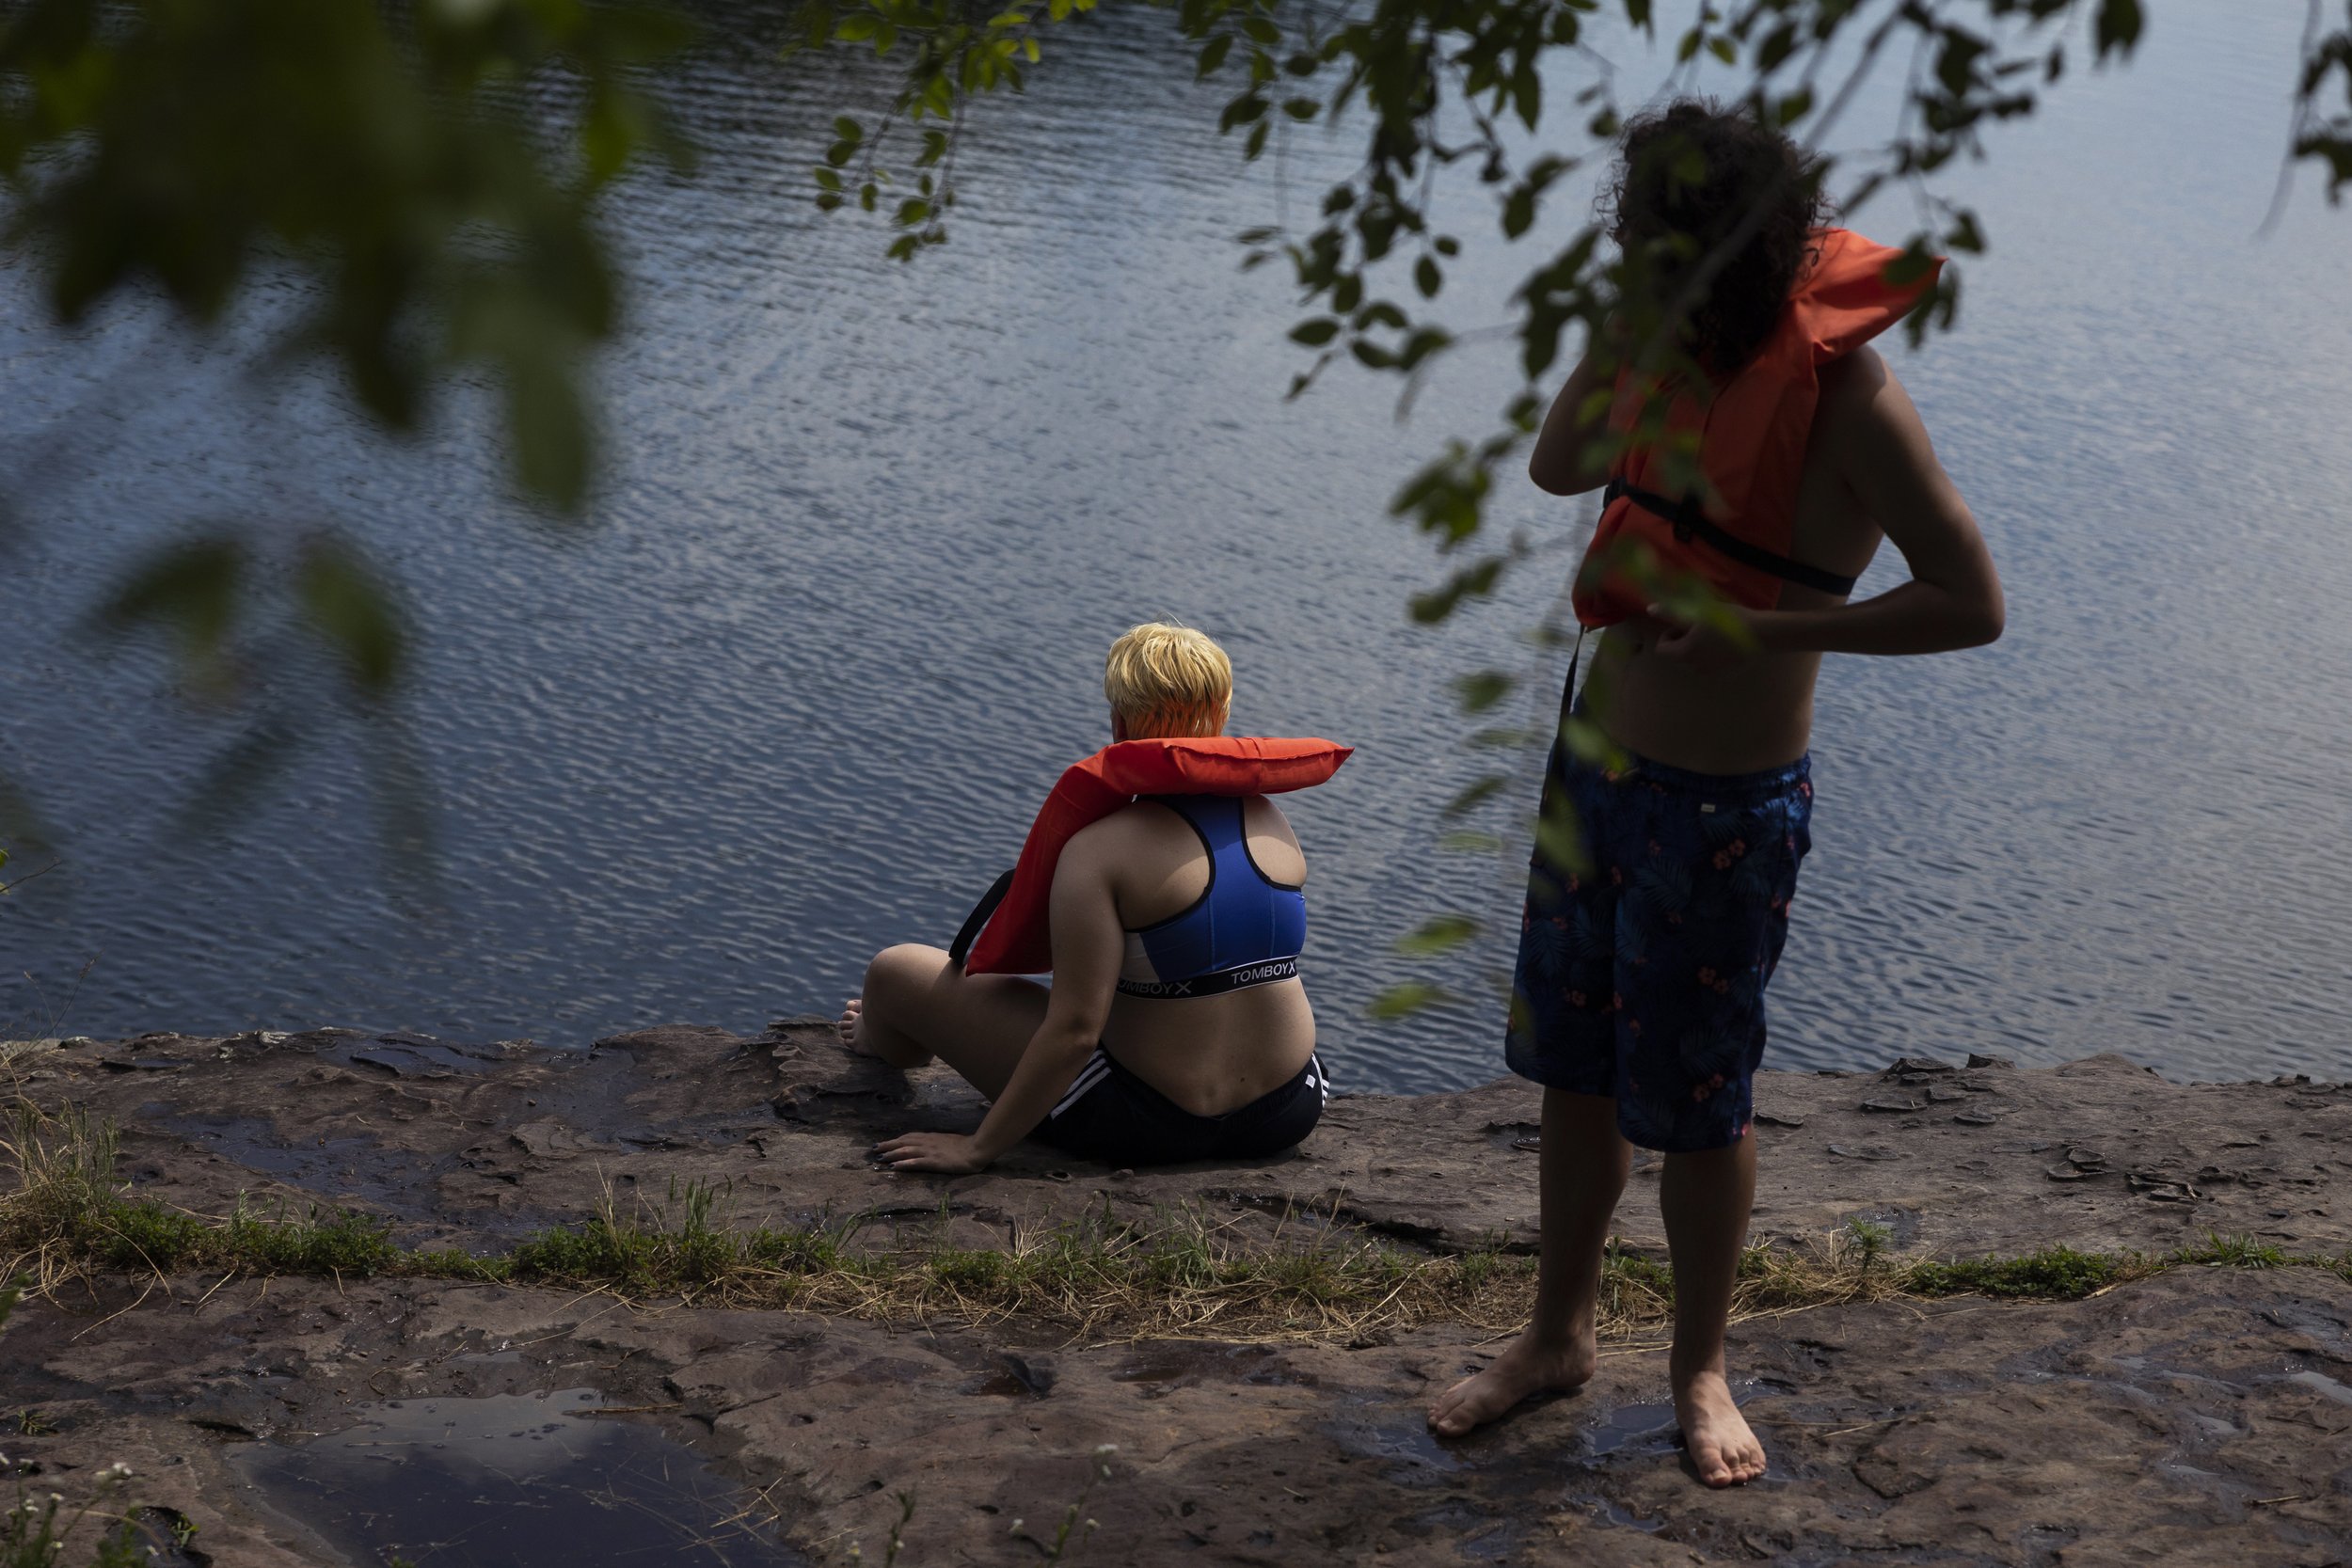  Fern (center—he/him) joins other campers in a cliff jumping activity. 